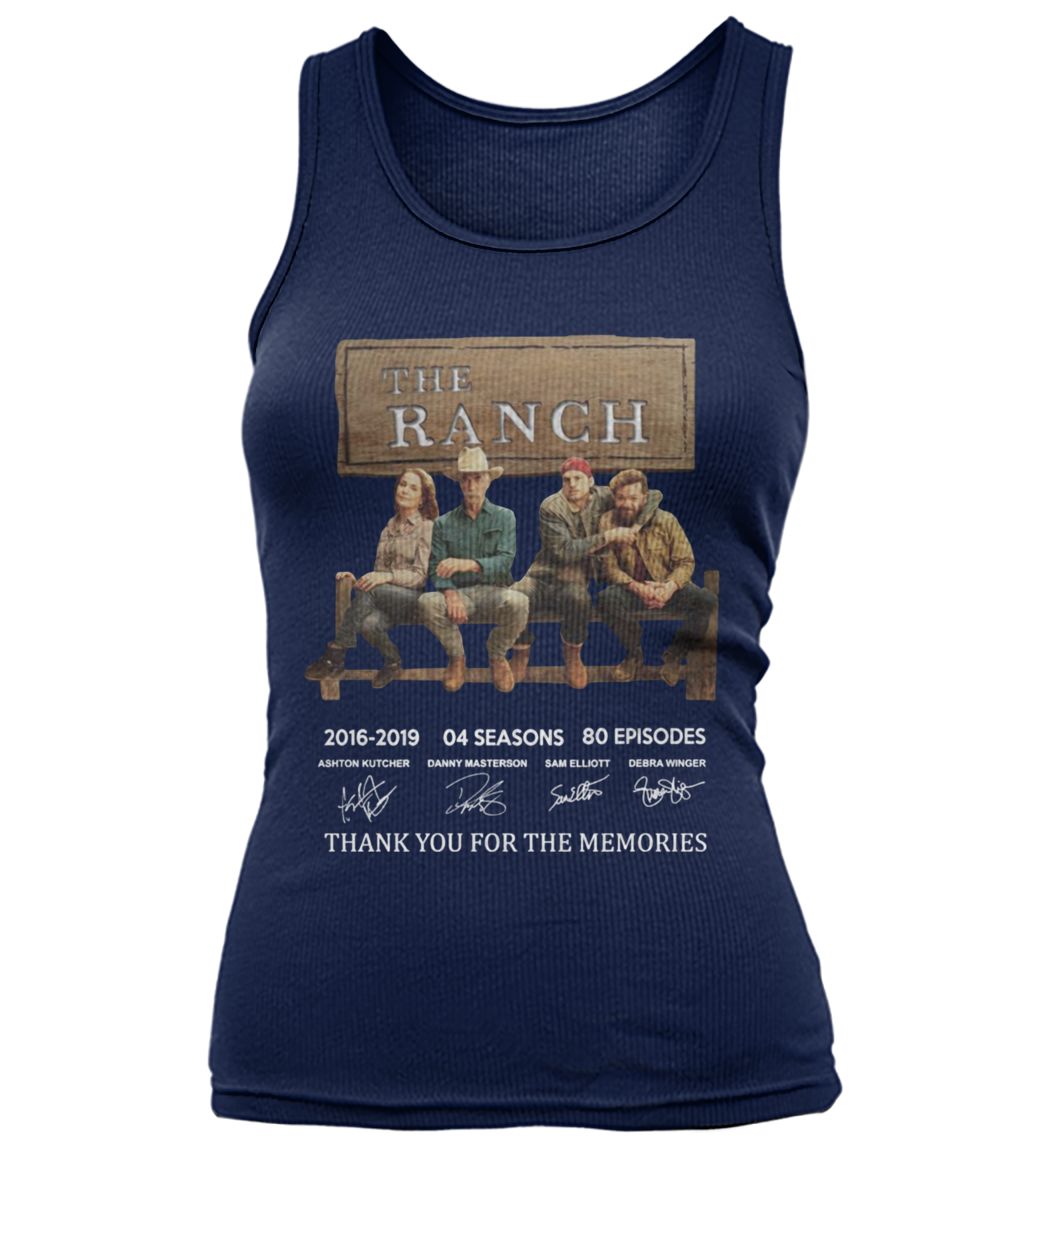 The ranch 2016 2019 04 seasons 80 episodes thank you for the memories signatures women's tank top